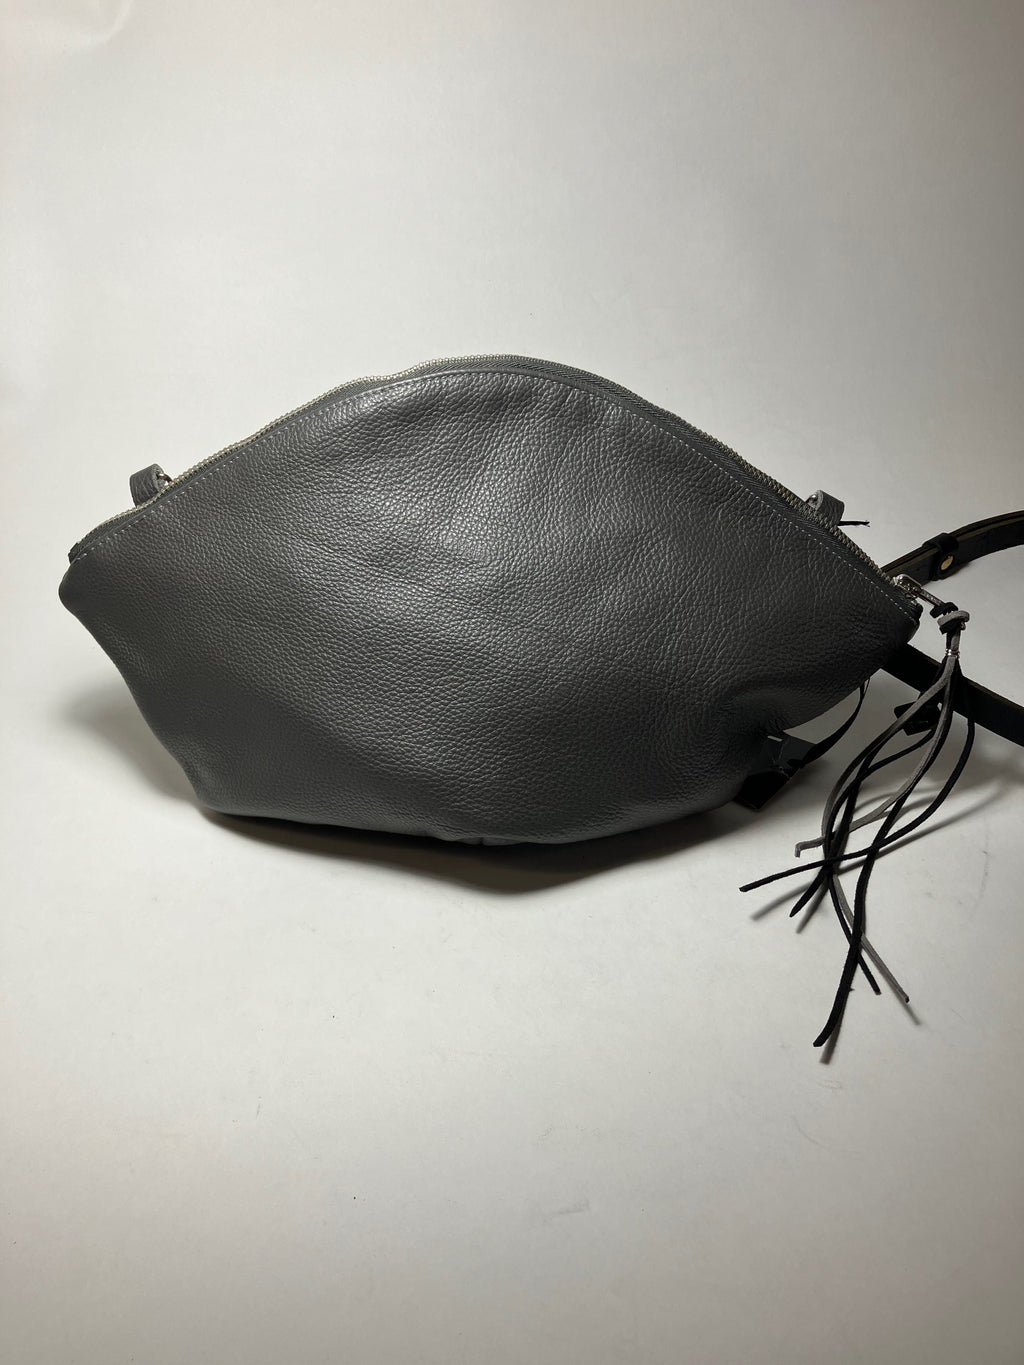 SAMPLE Leather pouch, evening clutch, small leather purse